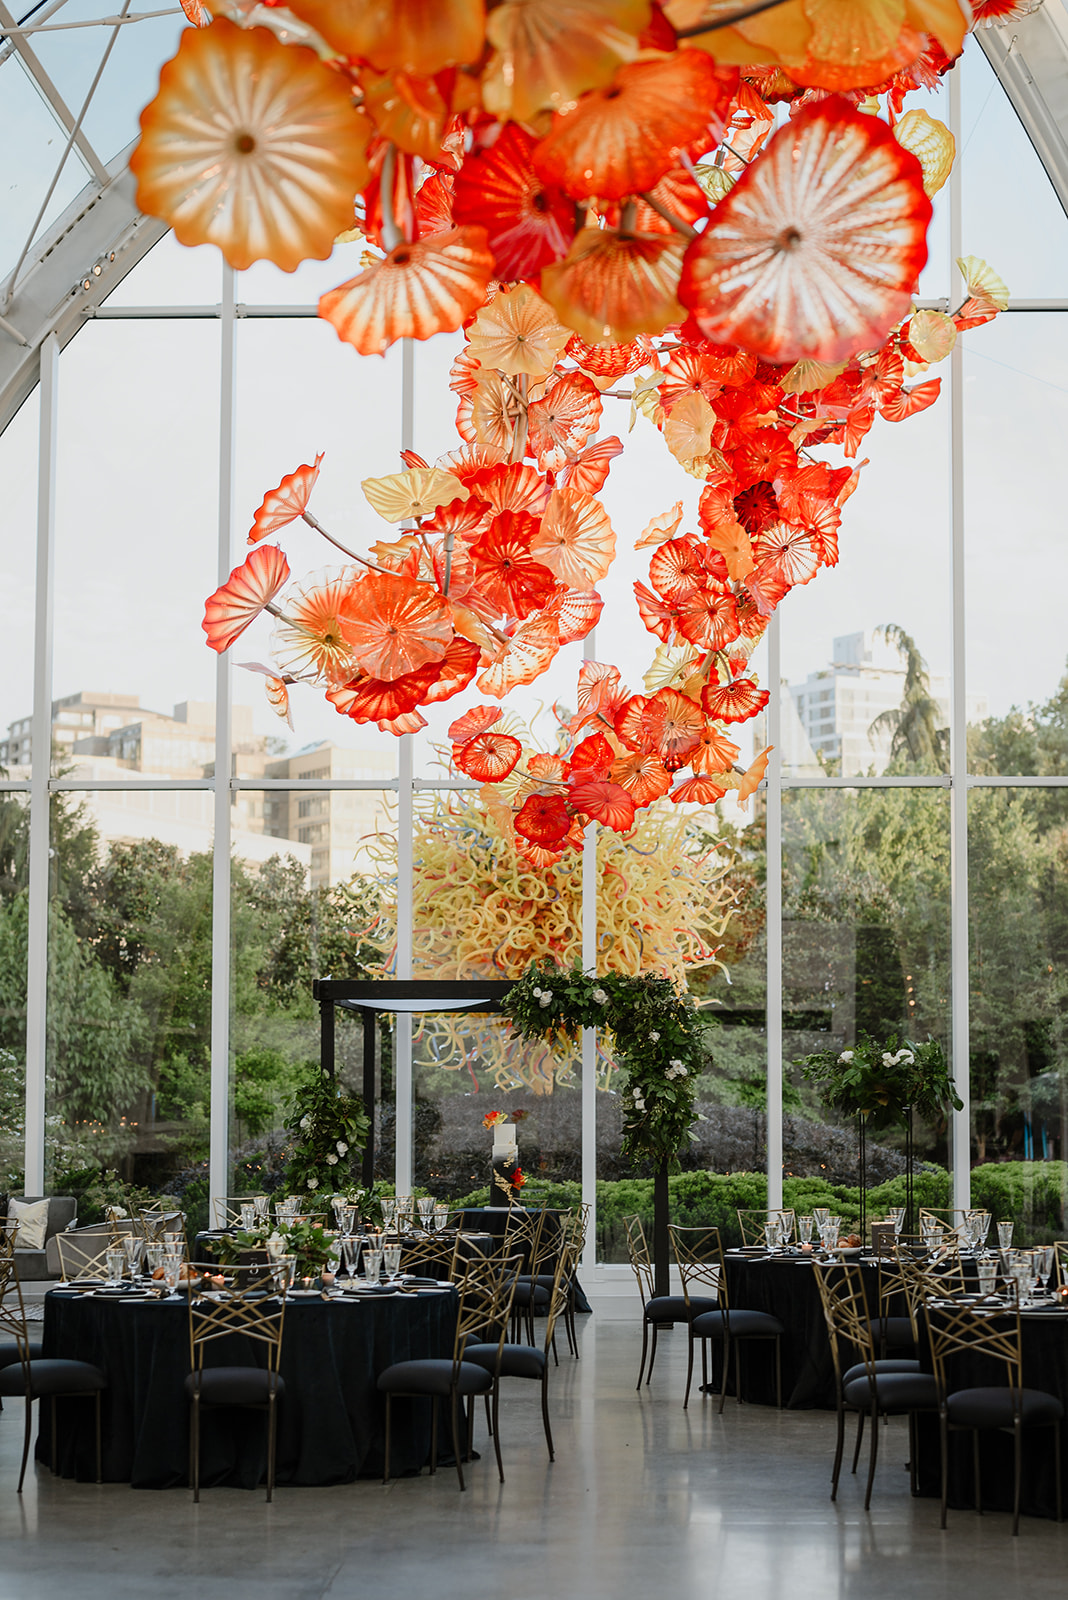 Round tables set with black tablecloths under vibrant glass flower installation at Chihuly Garden.